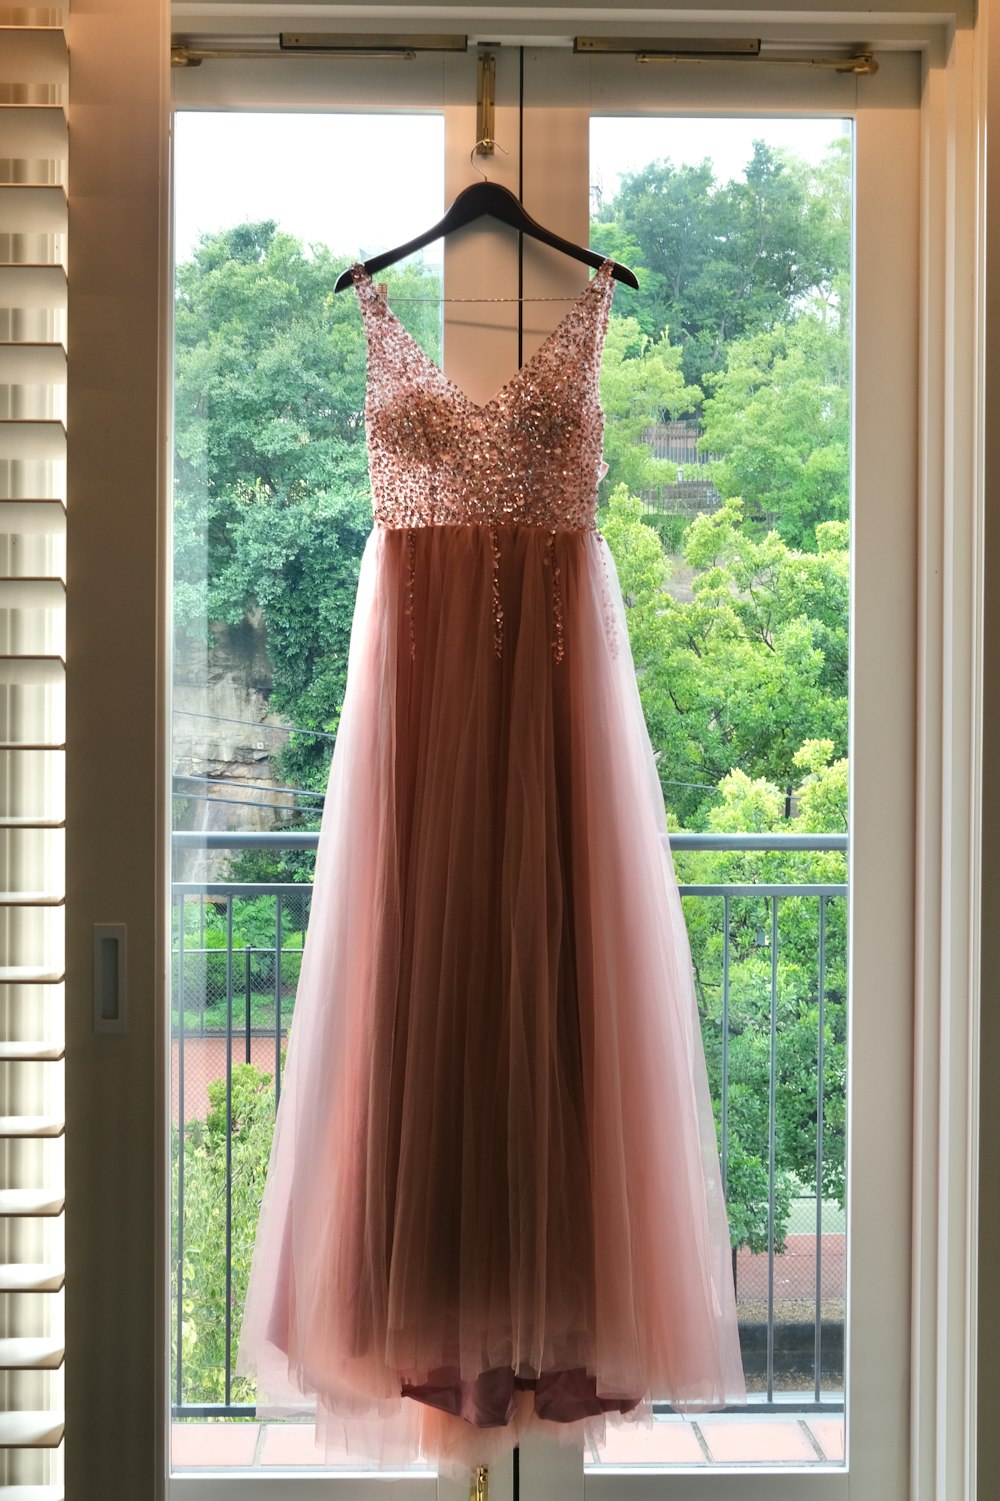 a dress hanging on a window sill in front of a window